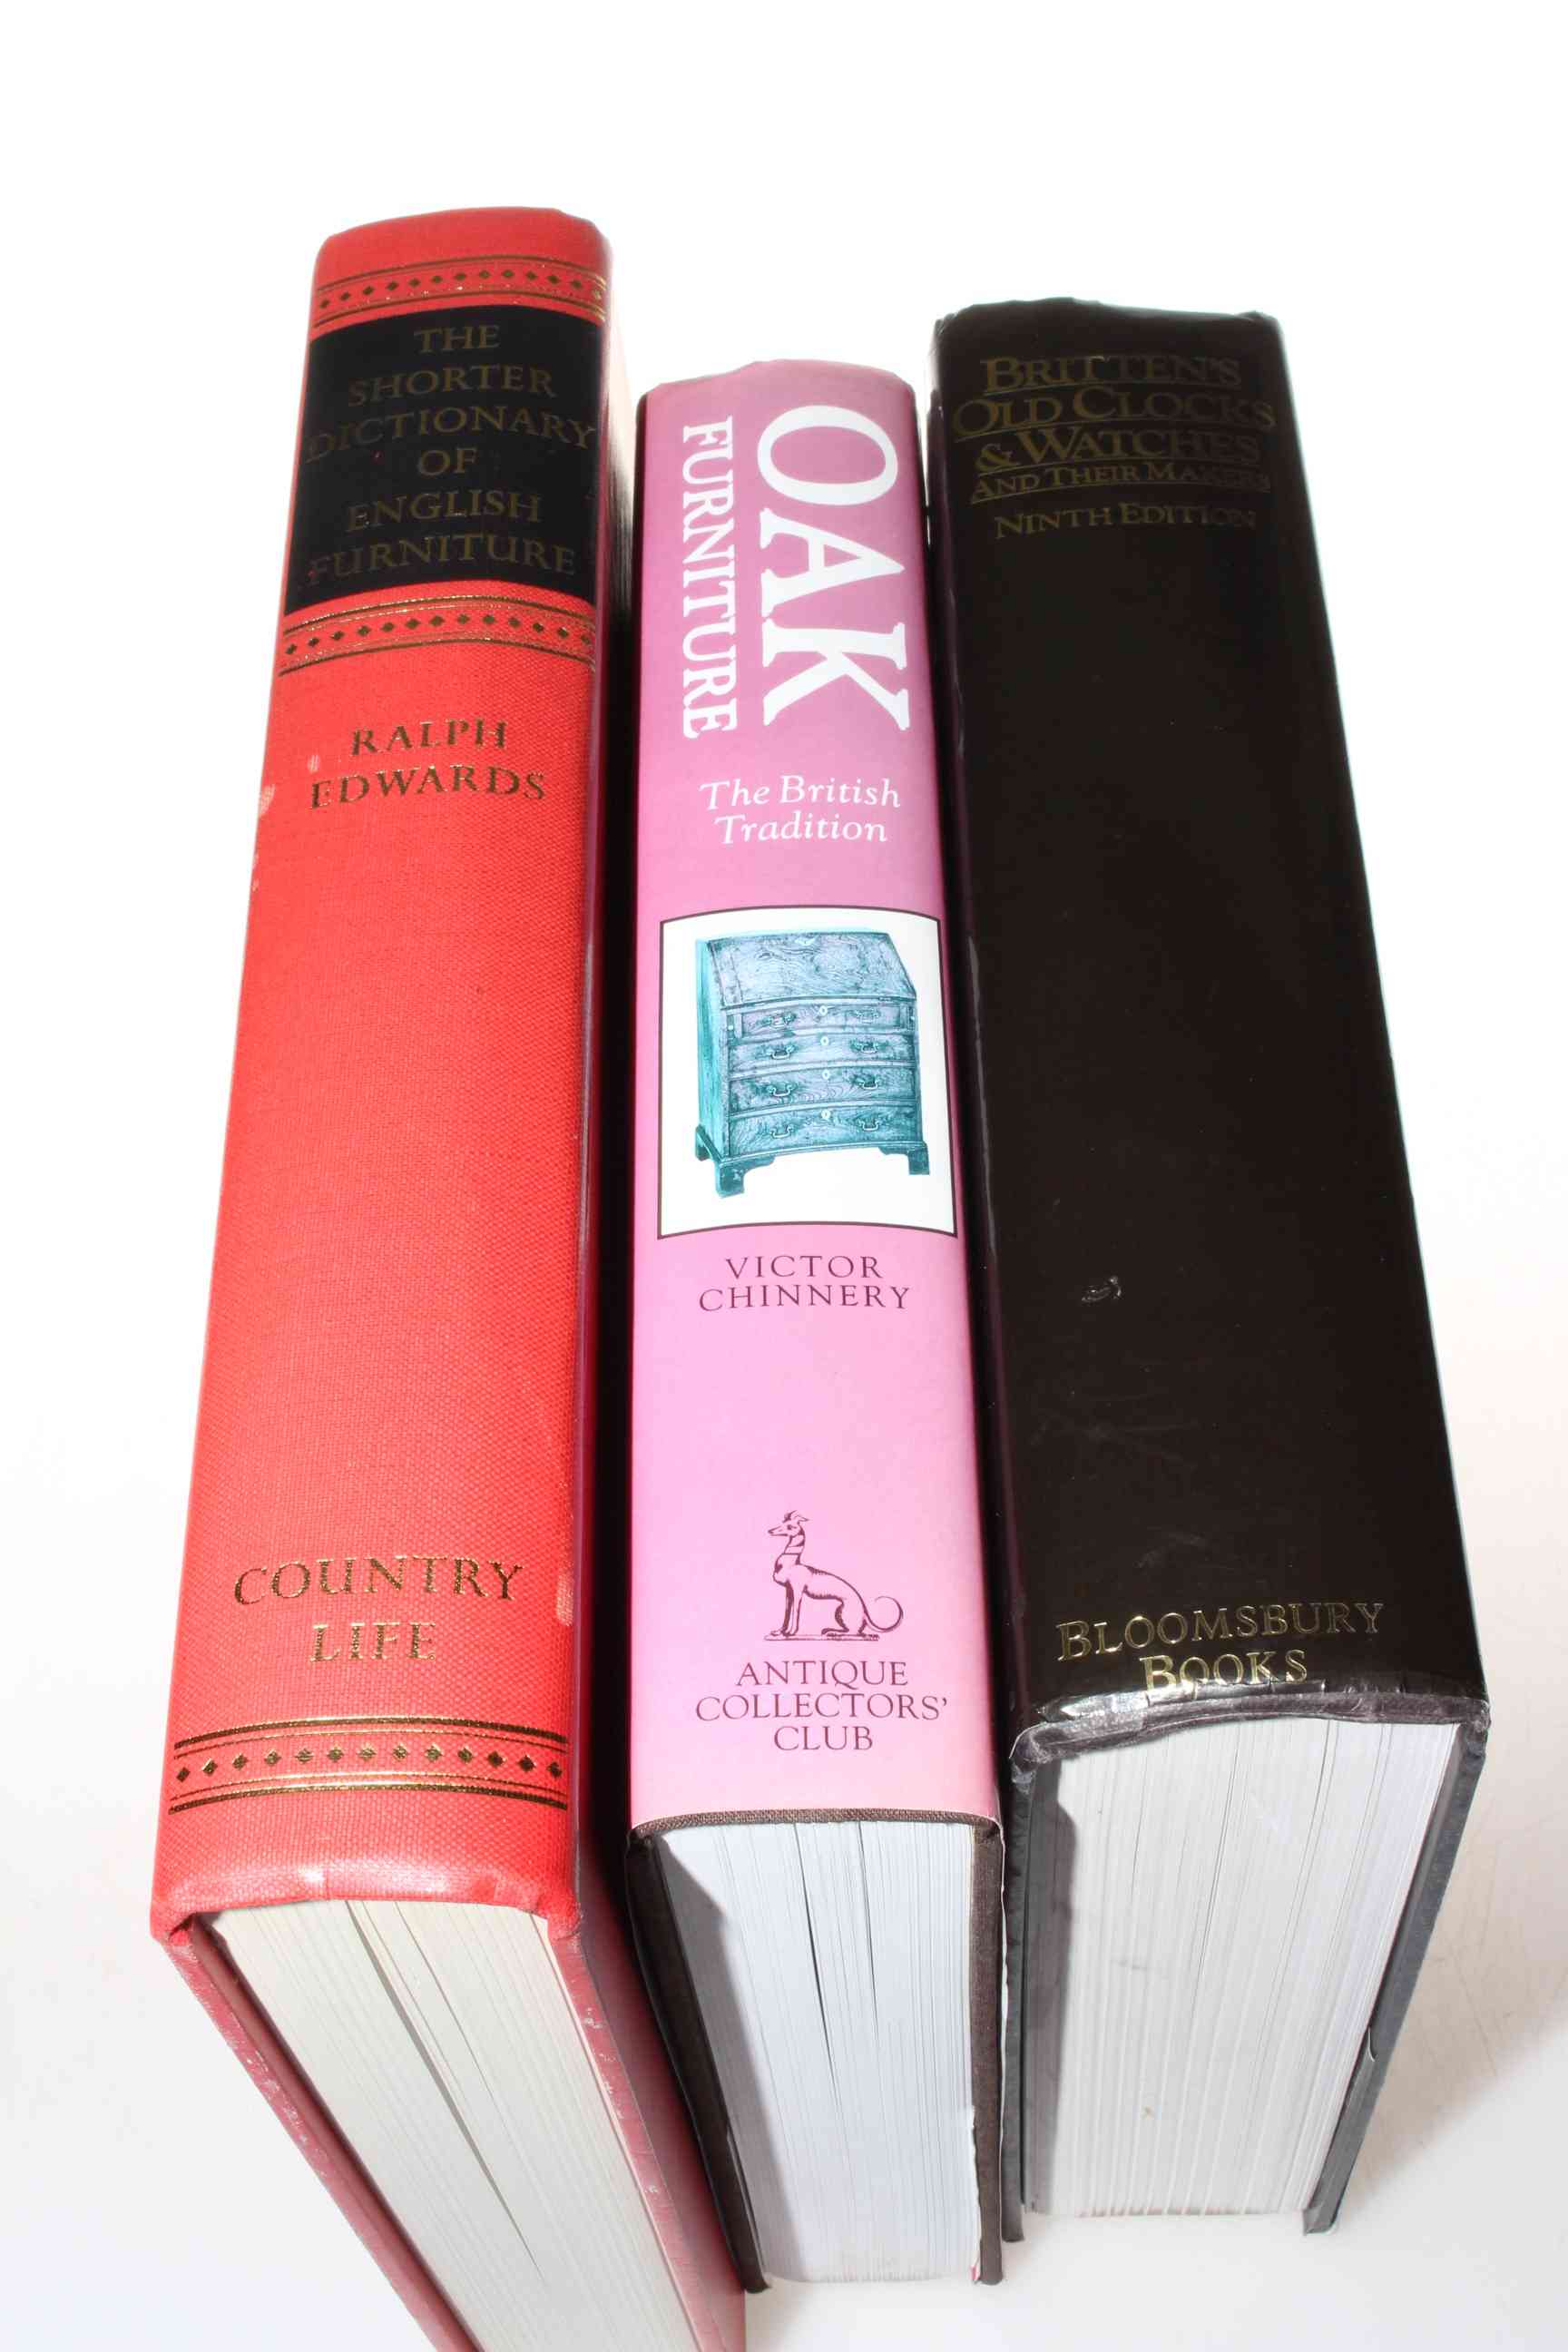 RALPH EDWARDS, The Shorter Dictionary of English Furniture, Country Life 1974; quarto,